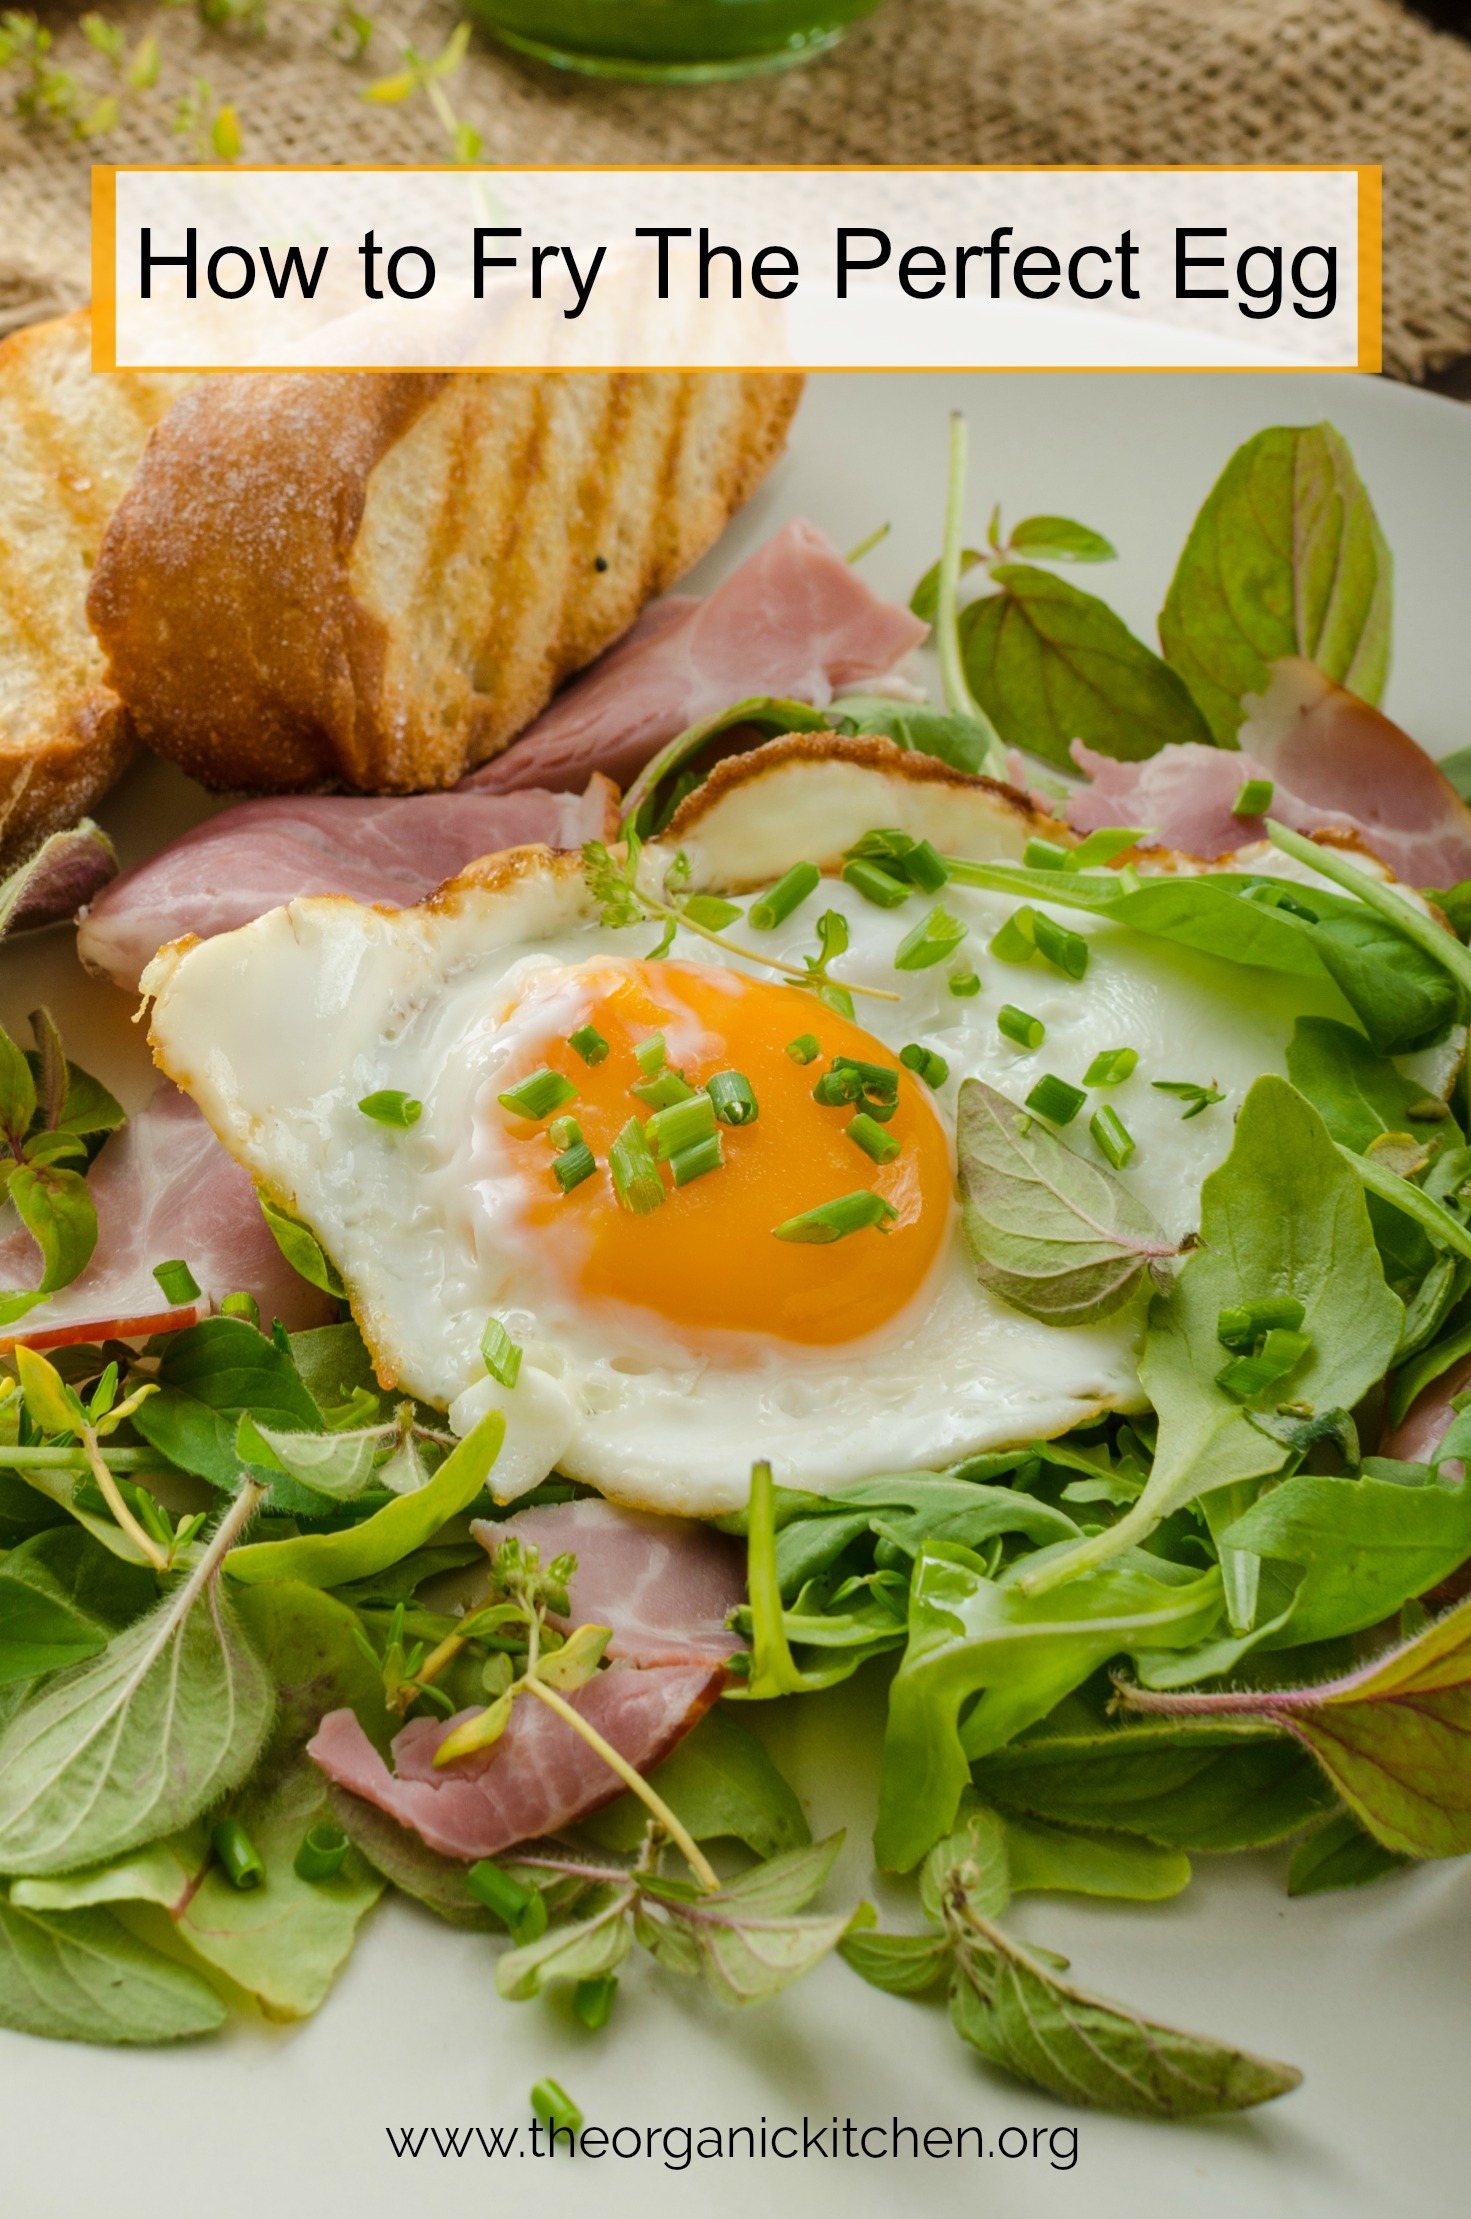 A fried egg in a bed of lettuce and ham: How To Fry the Perfect Egg!